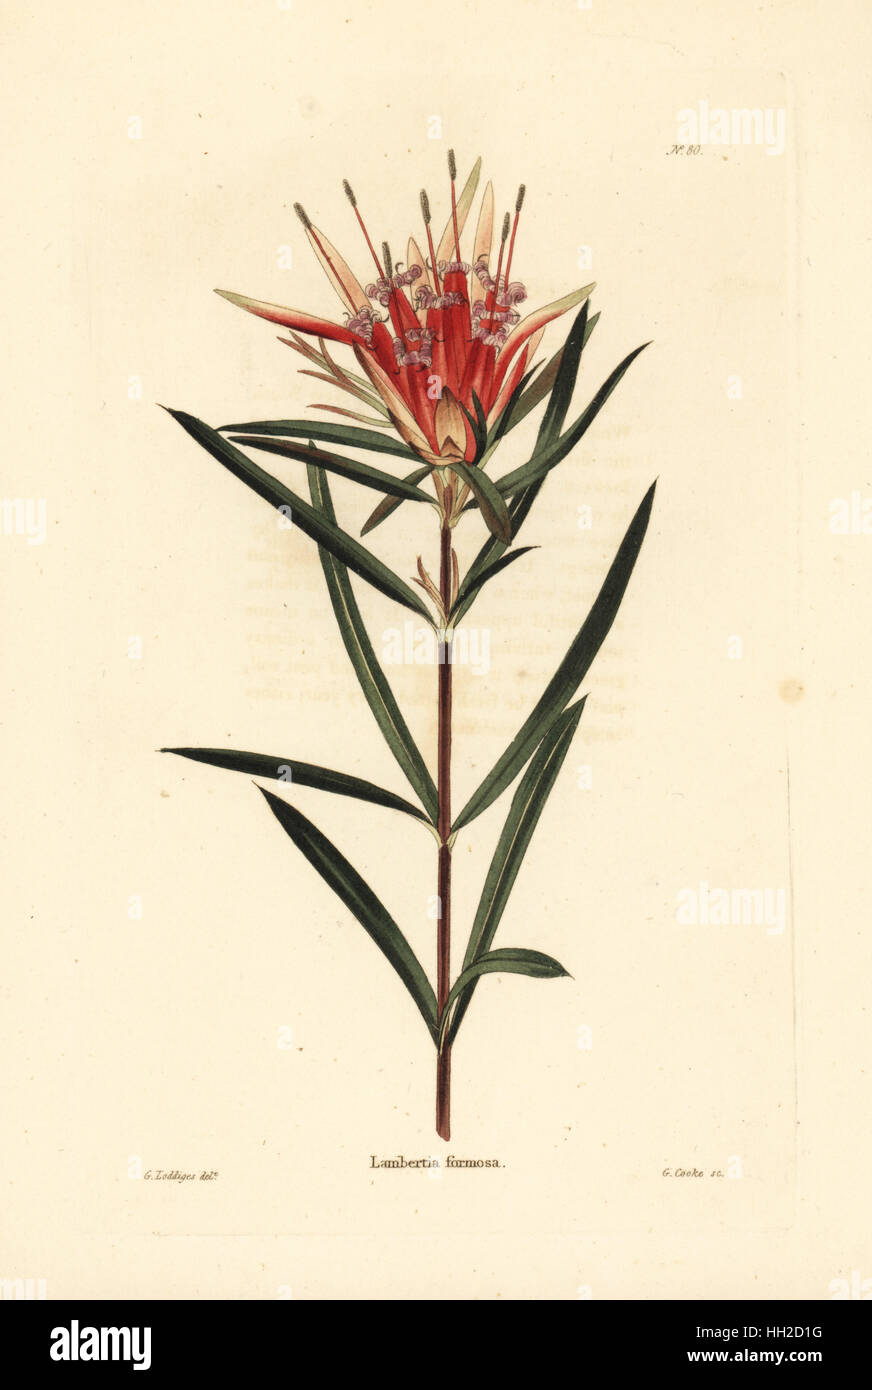 Mountain devil, Lambertia formosa. Handcoloured copperplate engraving by George Cooke after George Loddiges from Conrad Loddiges' Botanical Cabinet, Hackney, 1817. Stock Photo